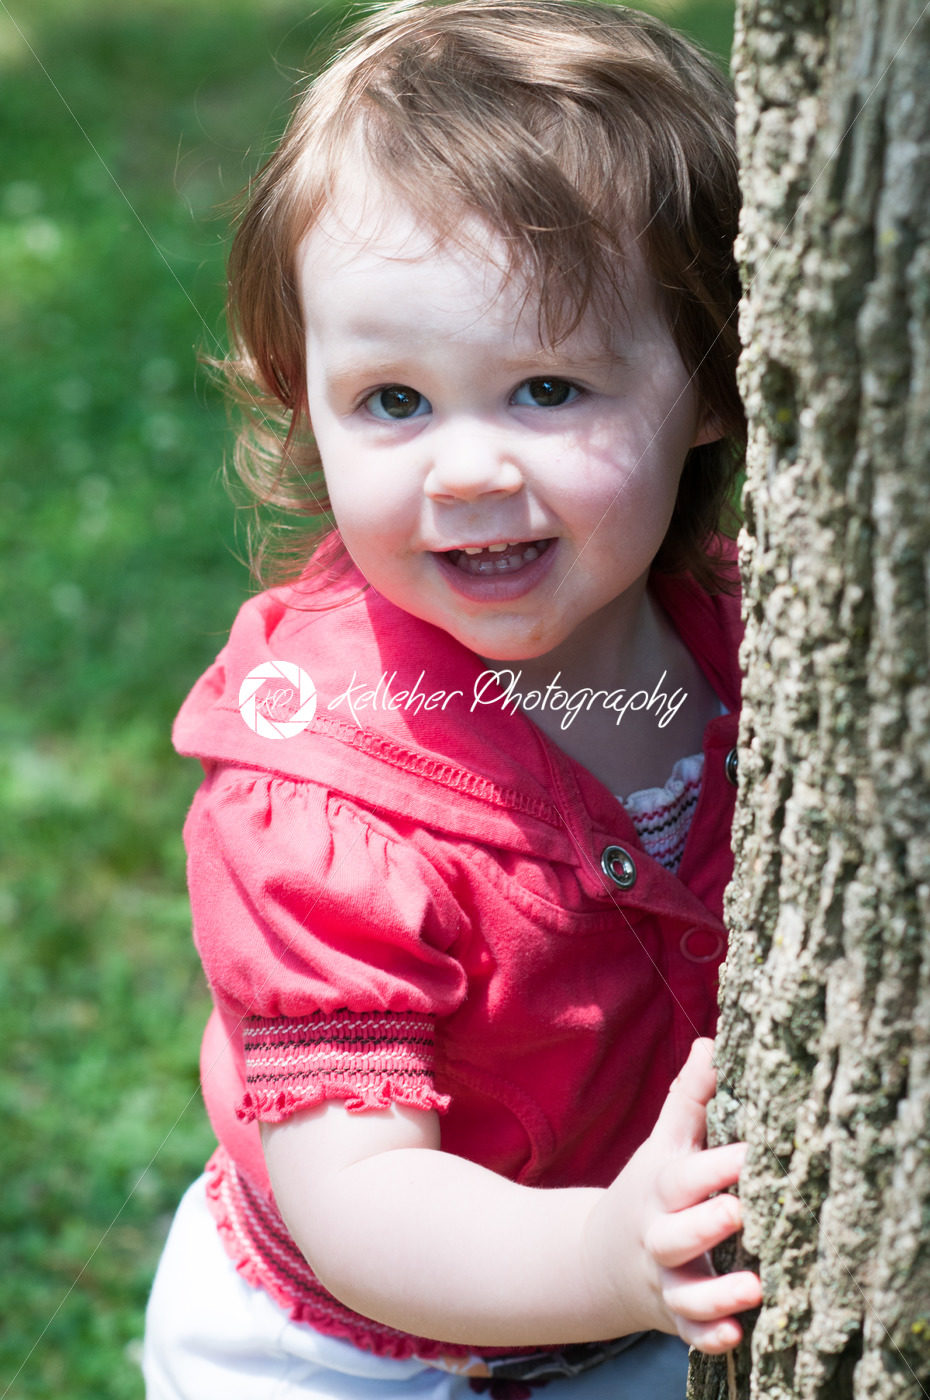 Young girl outside at park hugging standing next to tree - Kelleher Photography Store